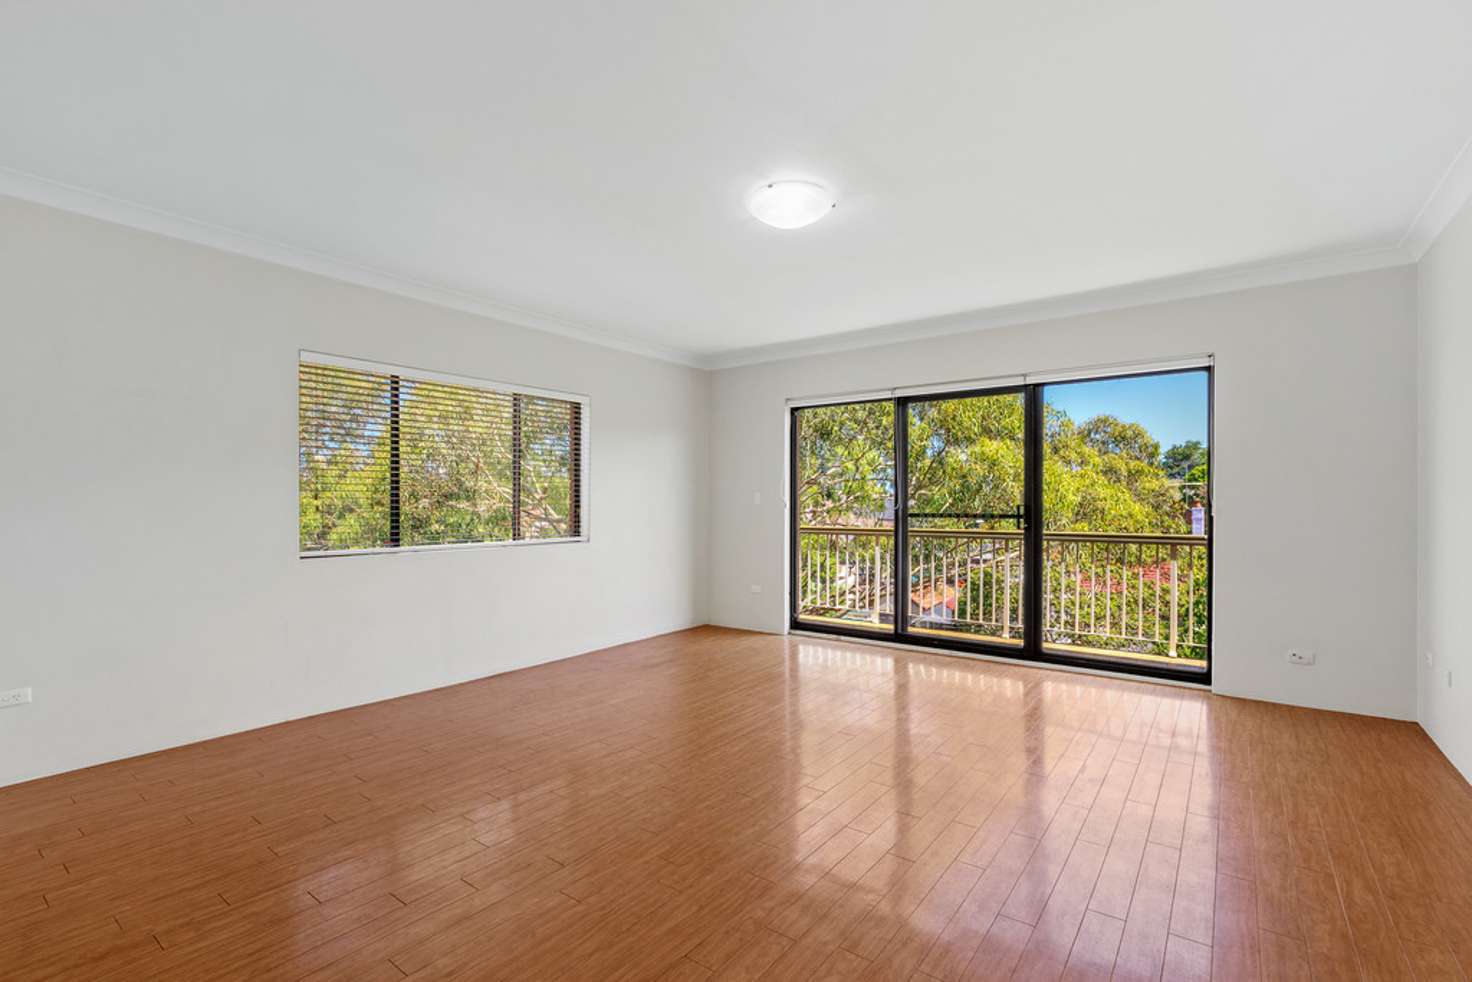 Main view of Homely apartment listing, 7/24-26 Grosvenor, Kensington NSW 2033